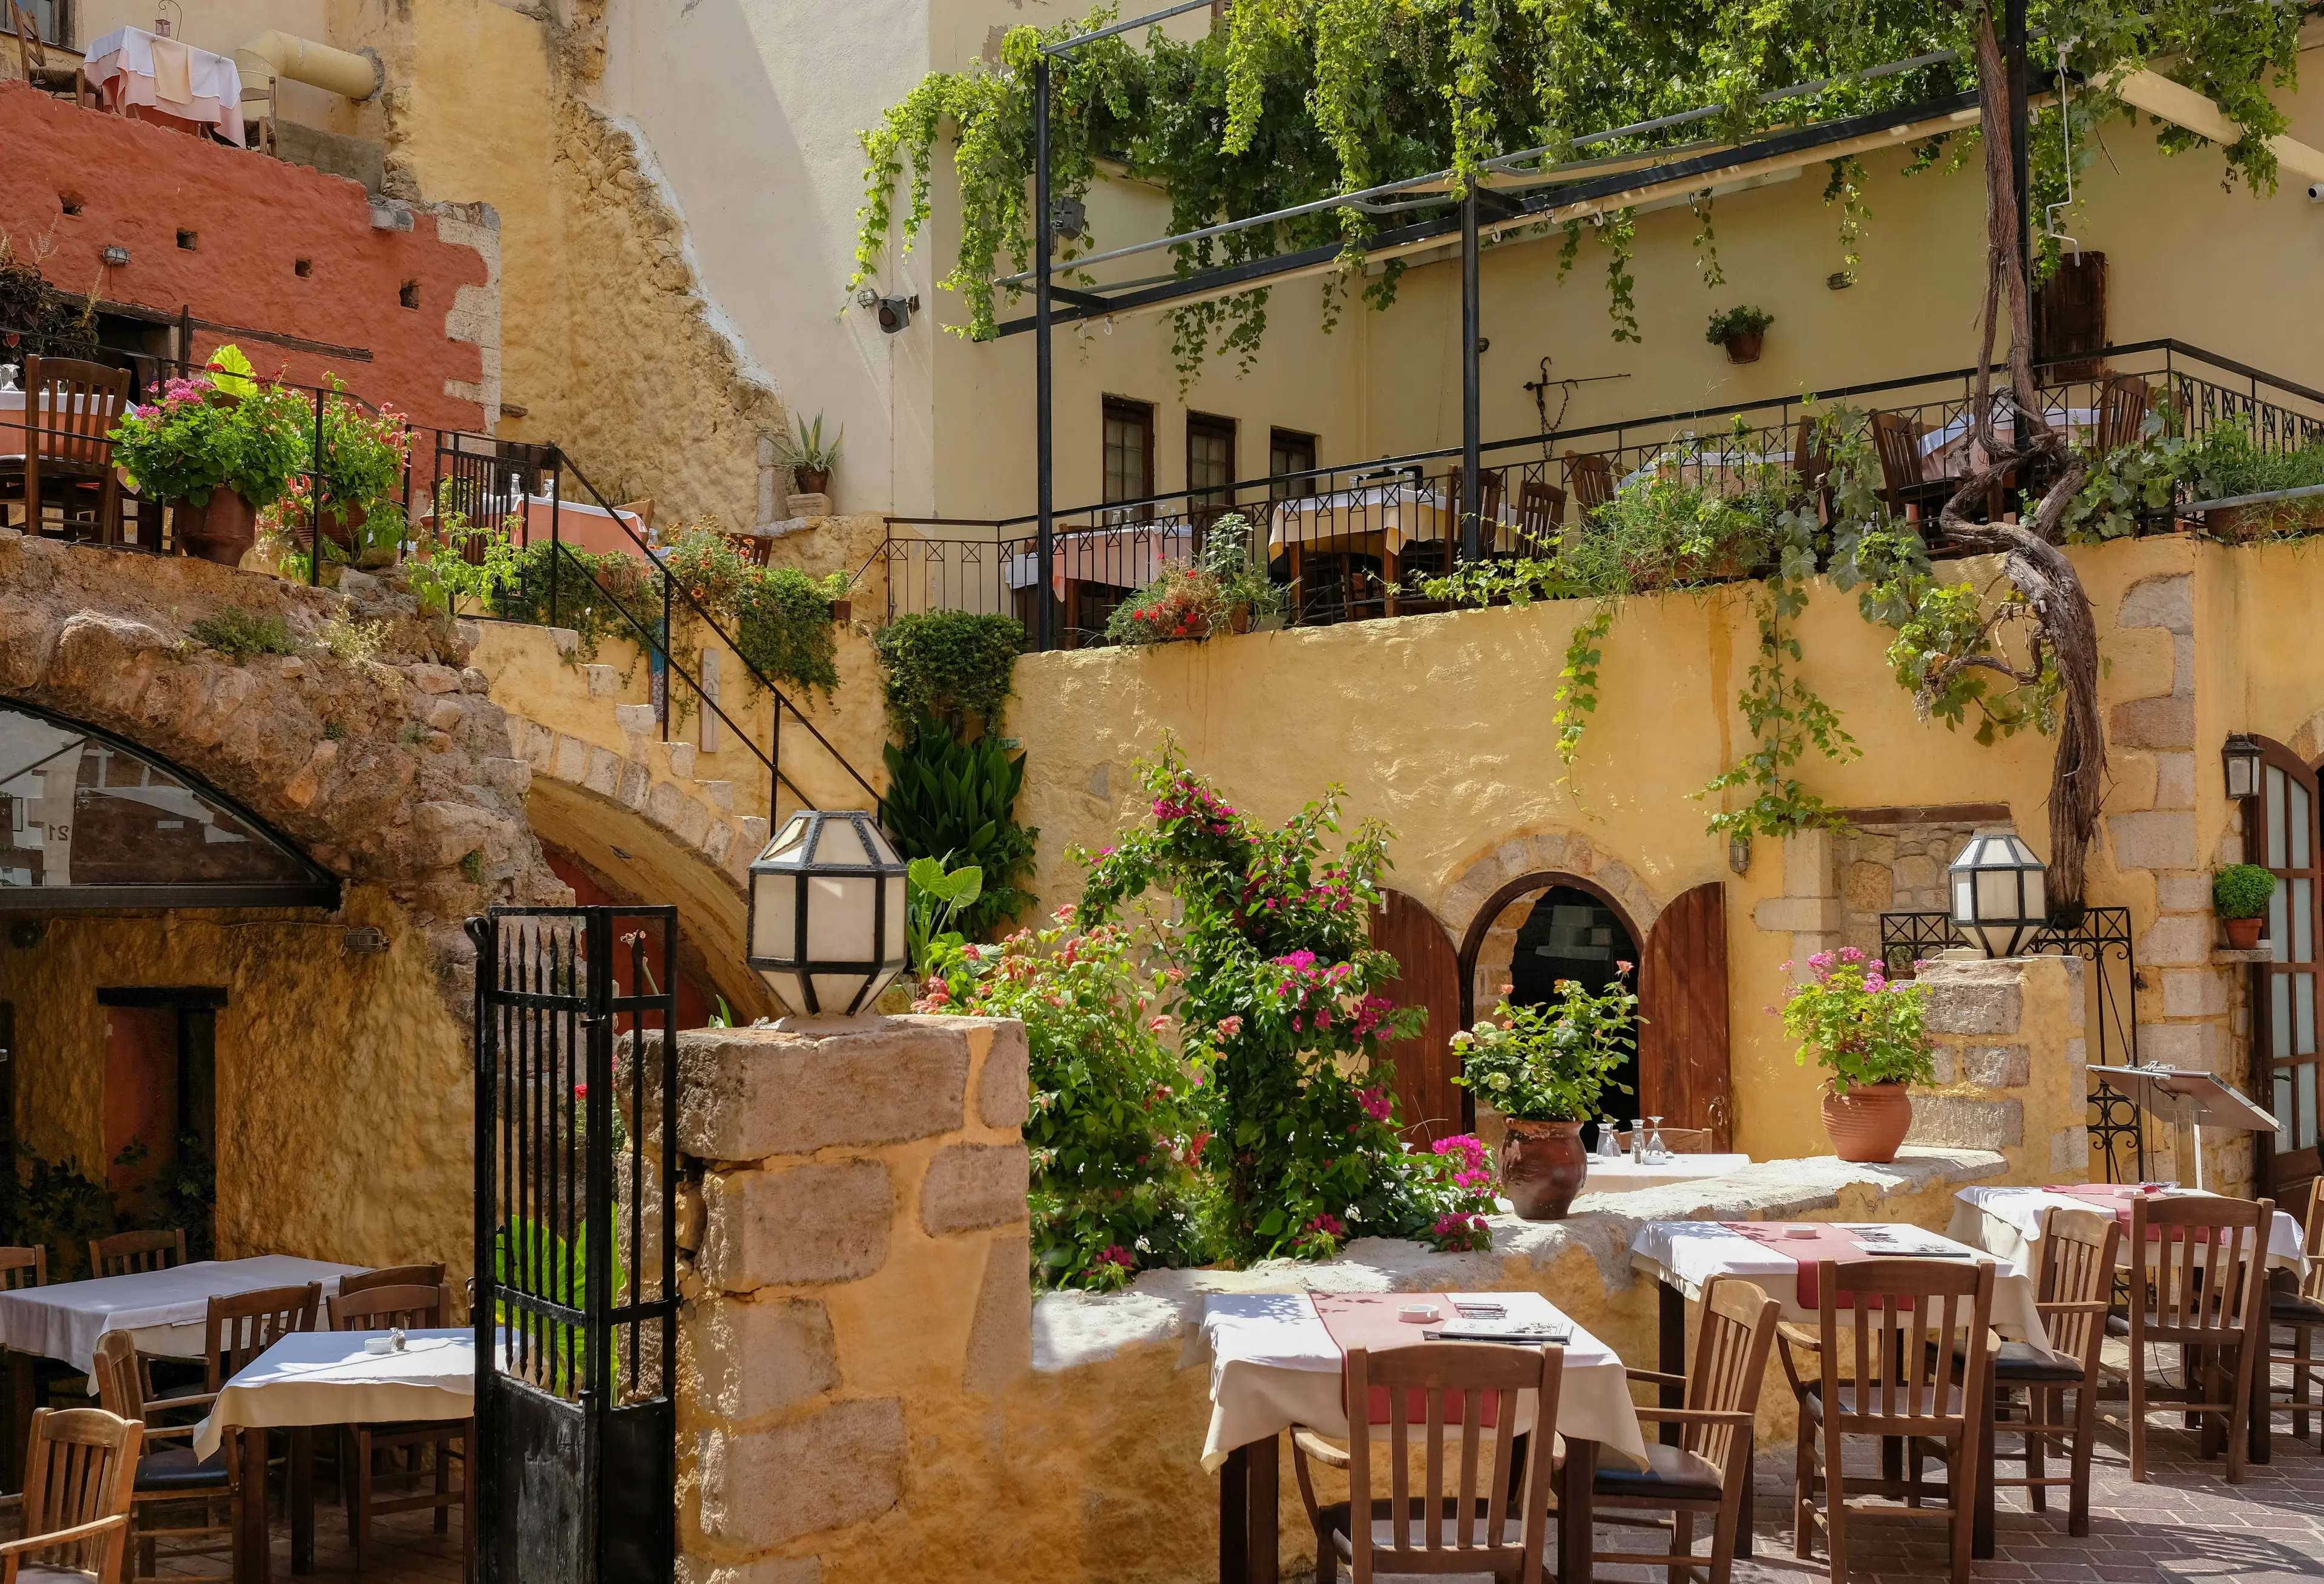 Patio in a Greek tavern with arches, stairs, plants and lanterns